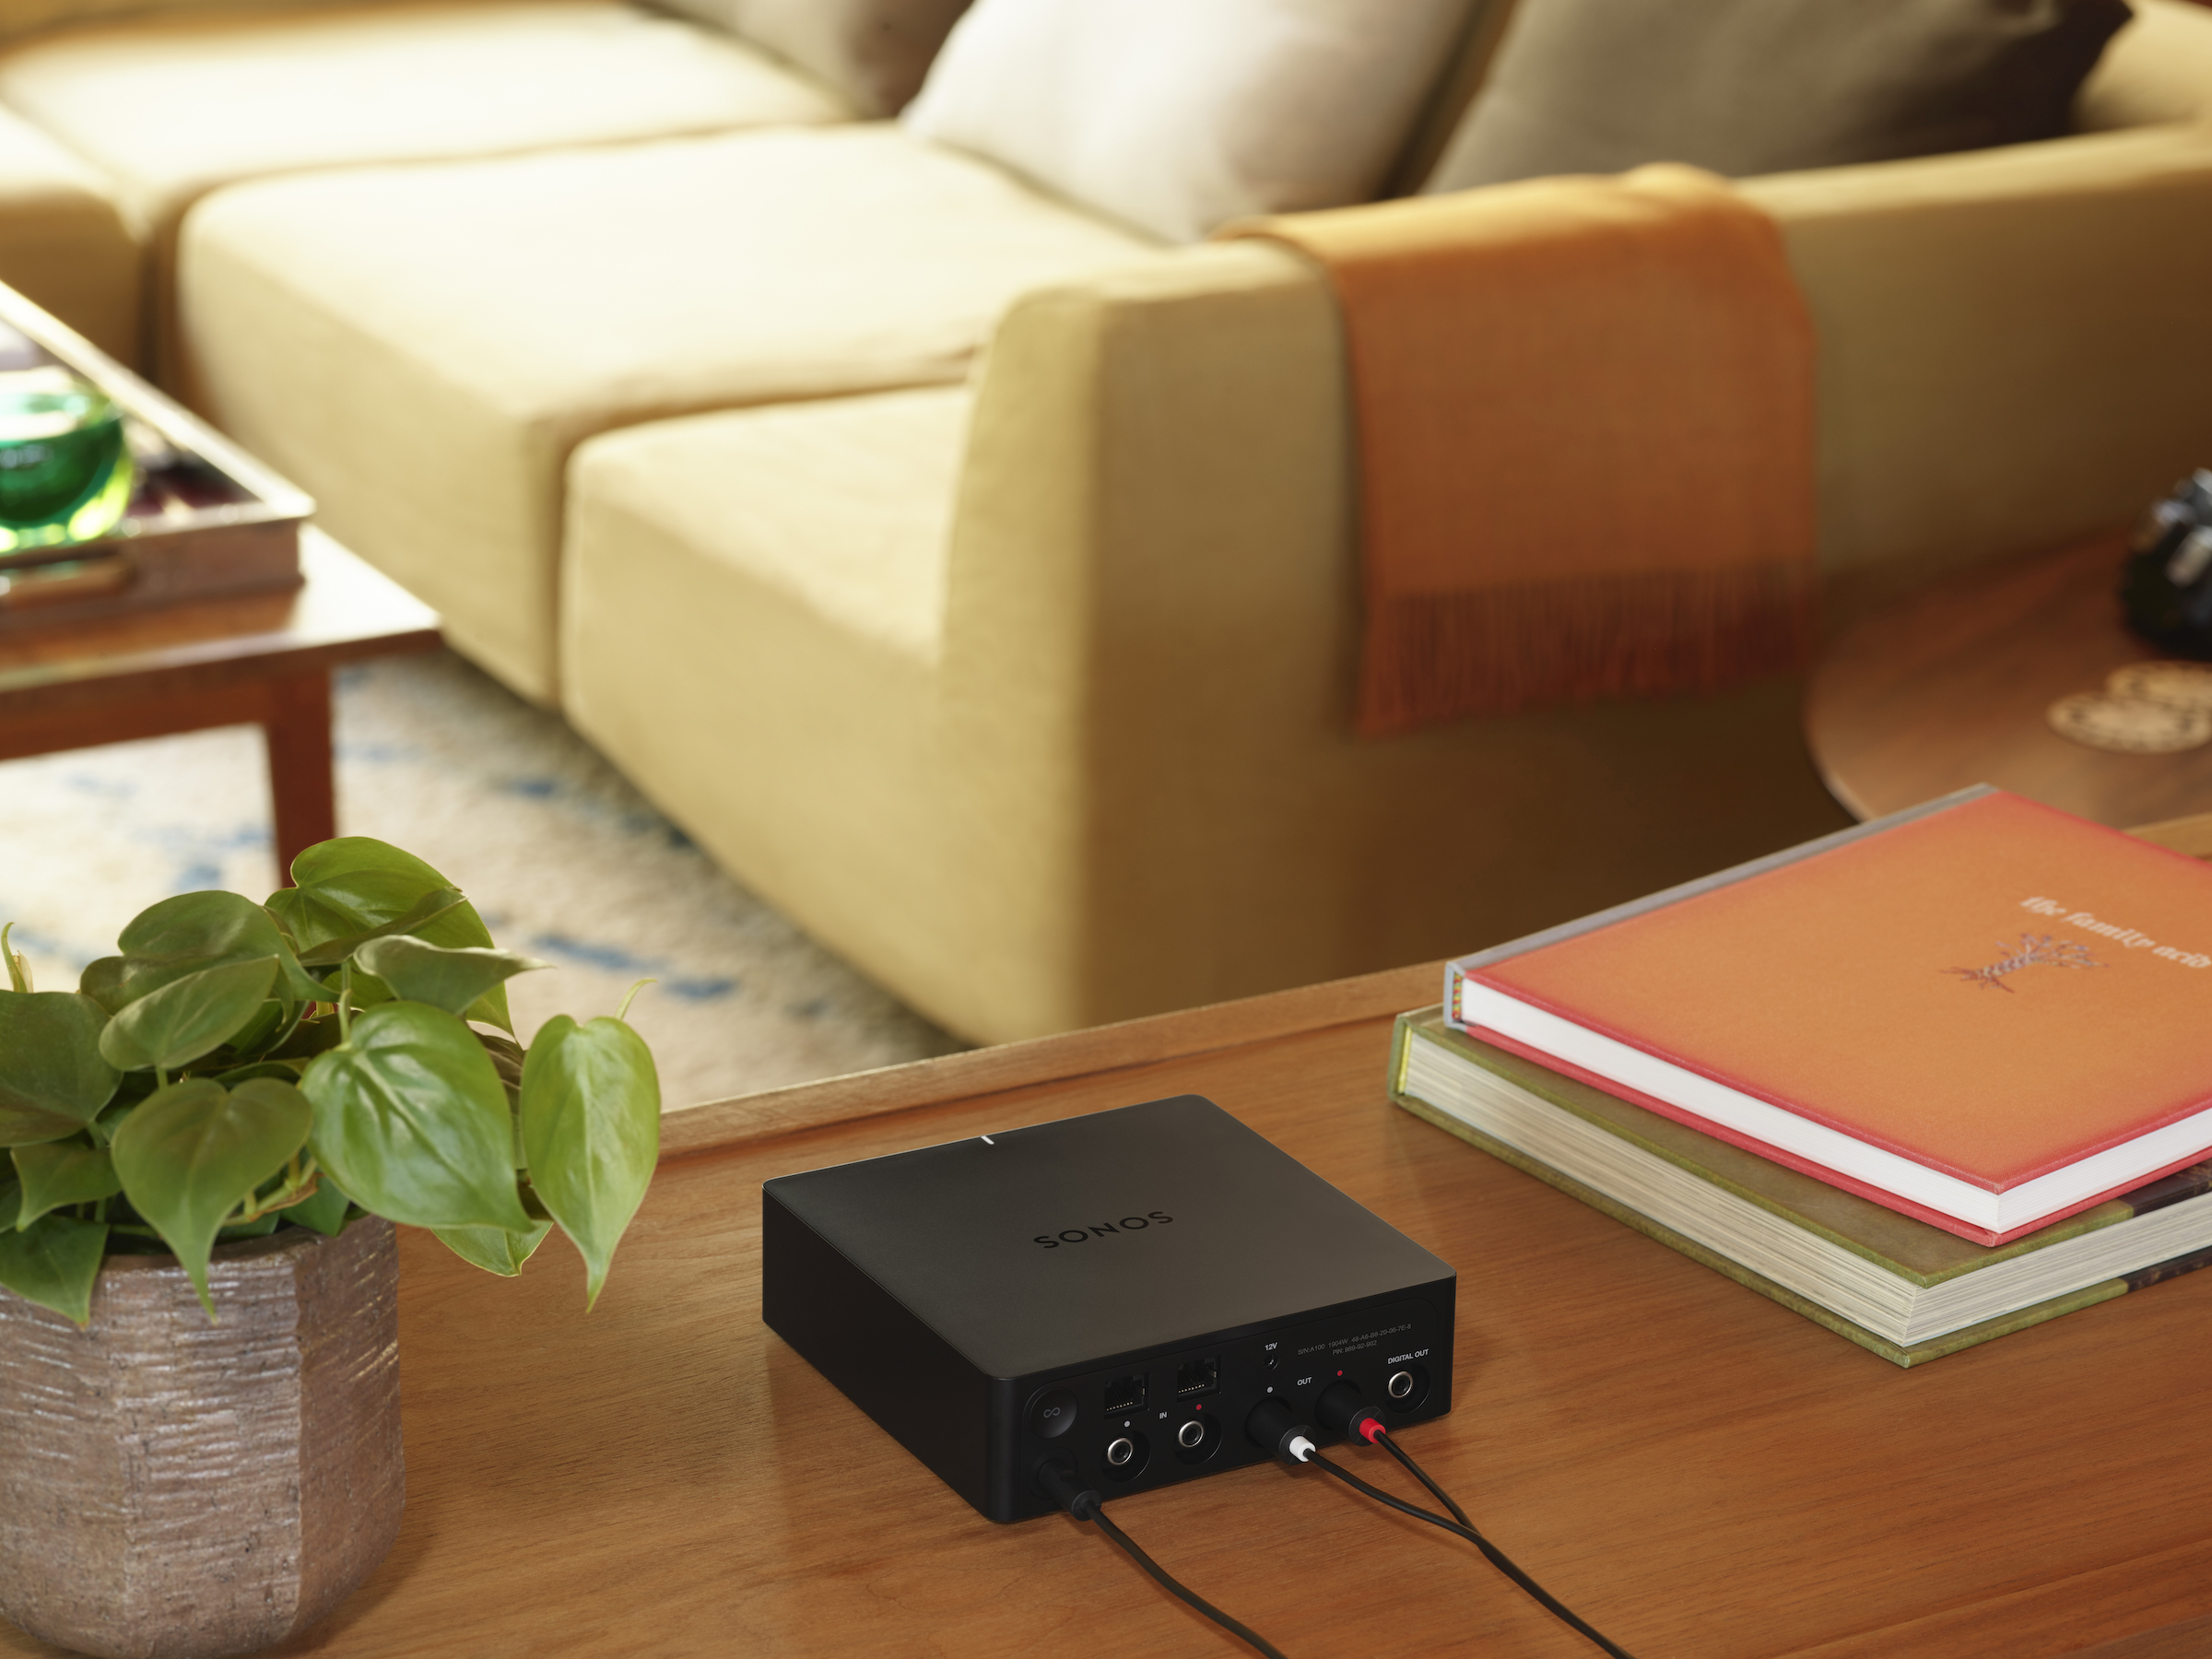 The new Port connects stereo setup to Sonos and AirPlay | TechCrunch